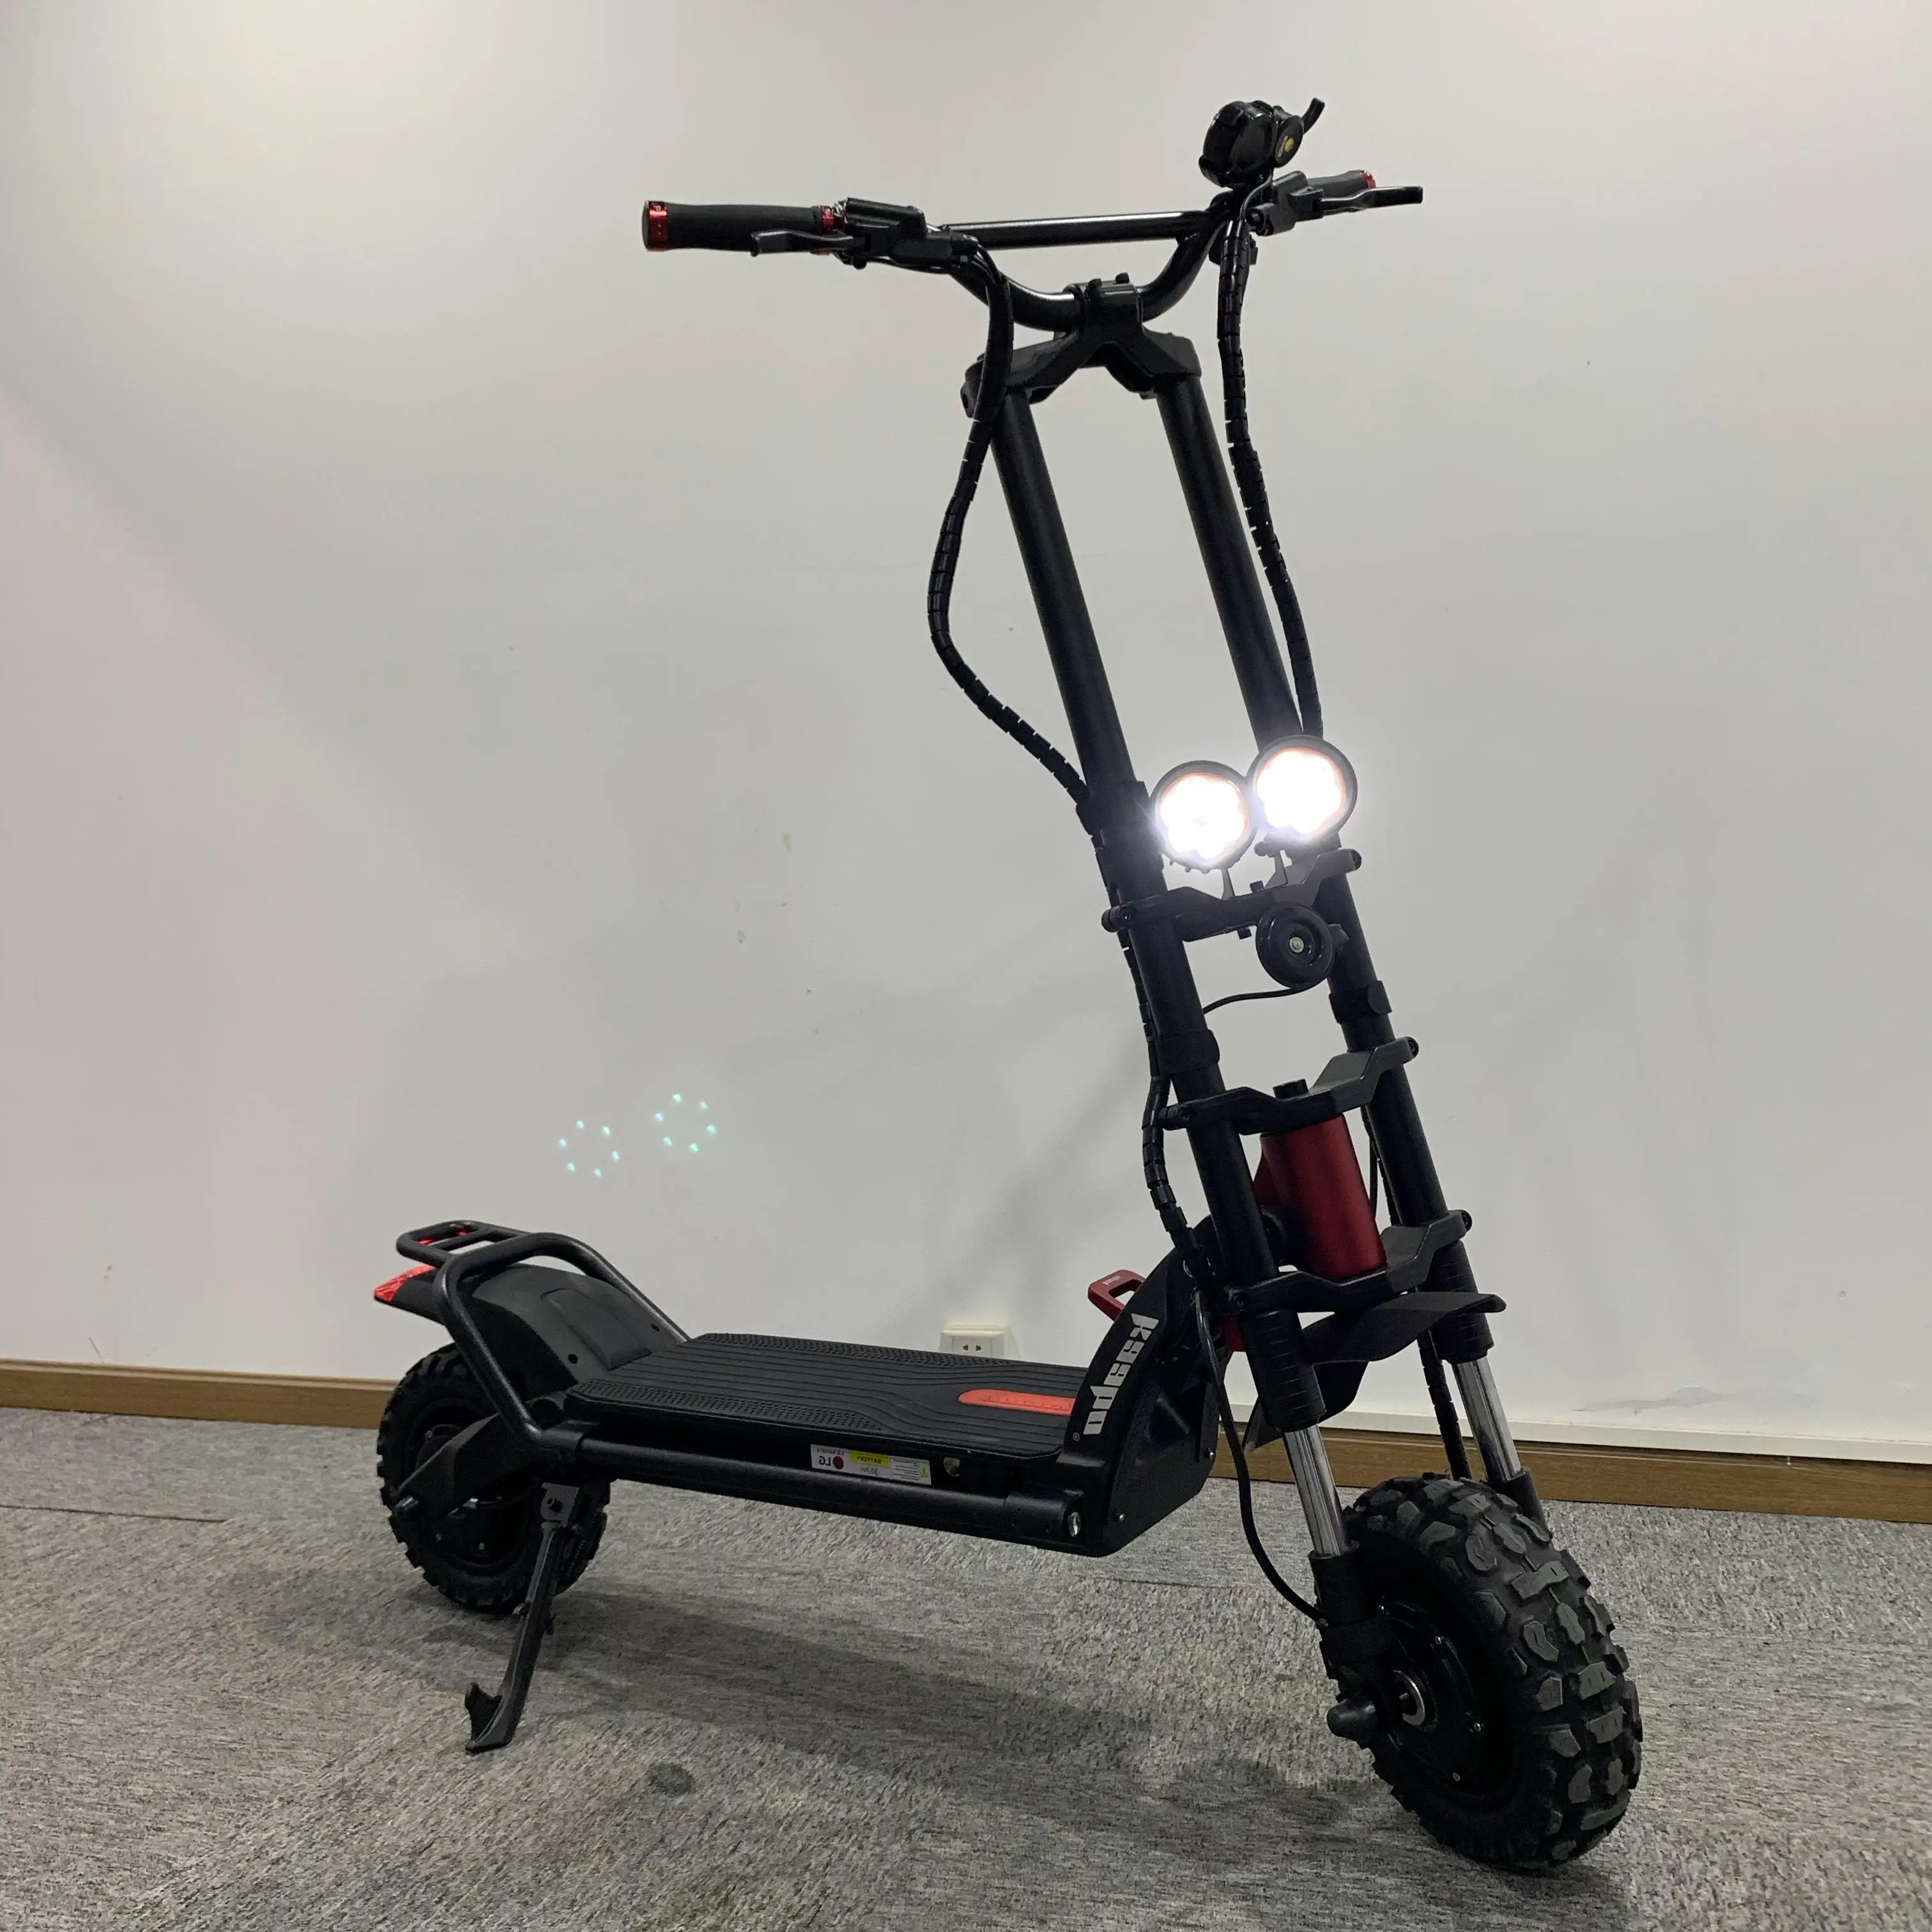 

New Best Fast Kaabo Wolf Warrior 11+ King 3000w 72v Electric Kick Scooter, Customized